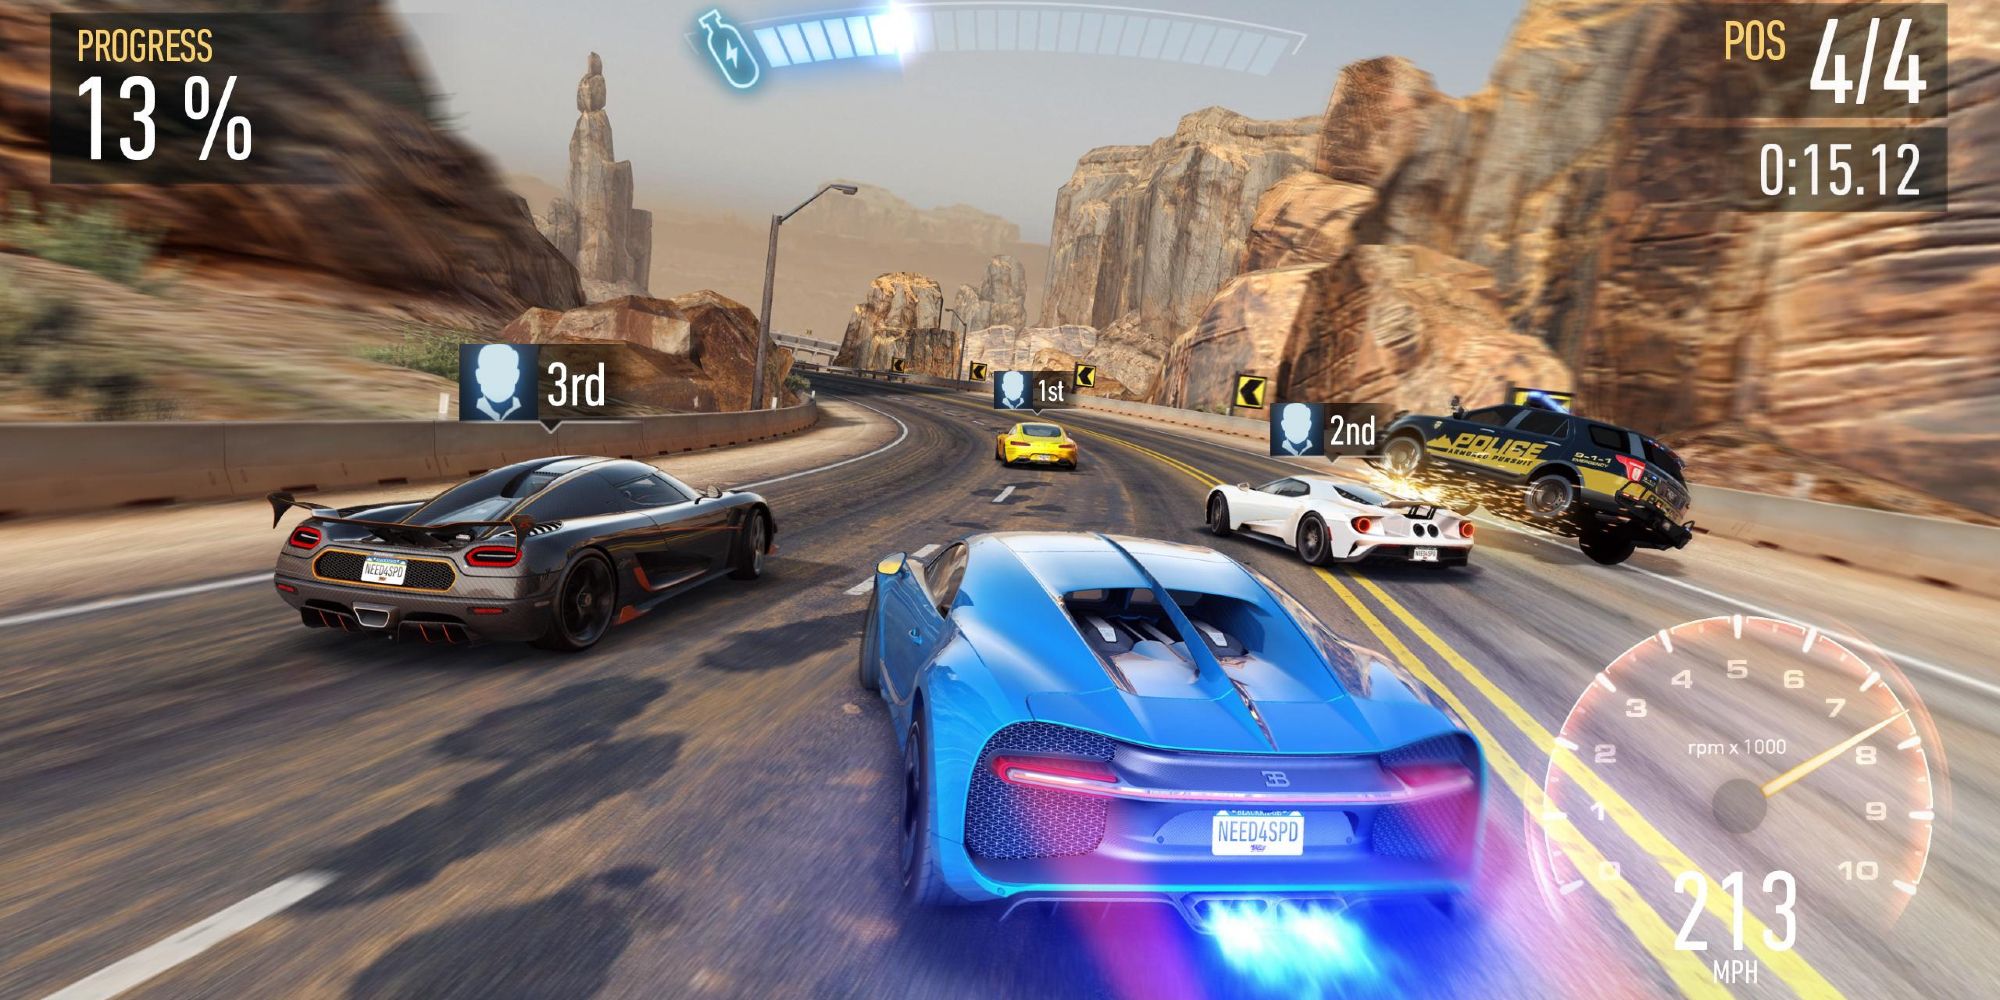 Best Racing Games on Mobile - Need for Speed No Limits - Player uses nitrous to speed up on race track